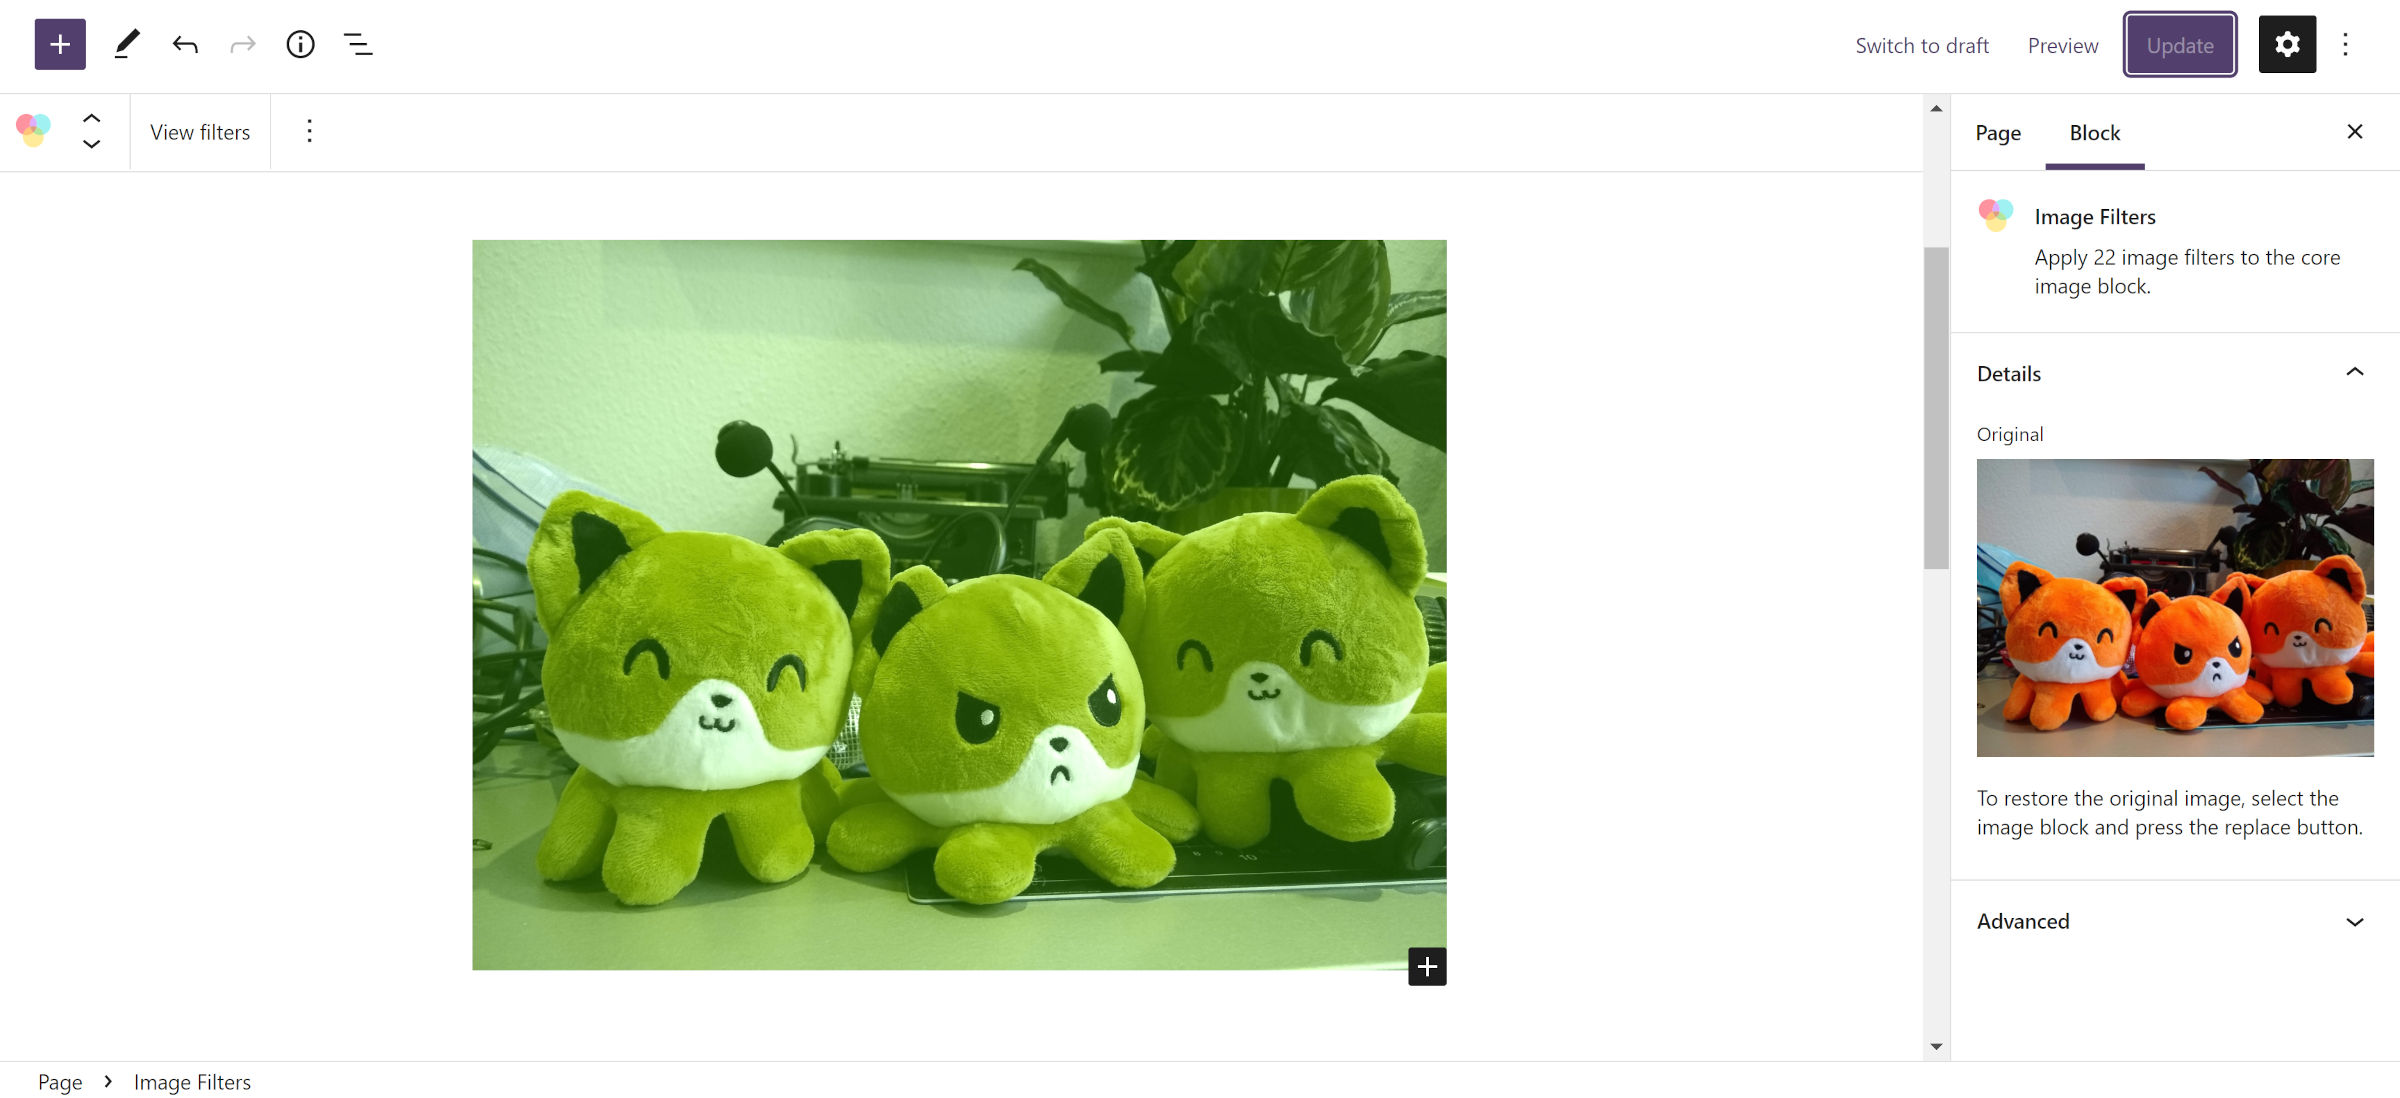 WordPress post editor.  In the content canvas, an image of plush foxes are shown with a tint over them.  In the sidebar on the right, the original image is shown.